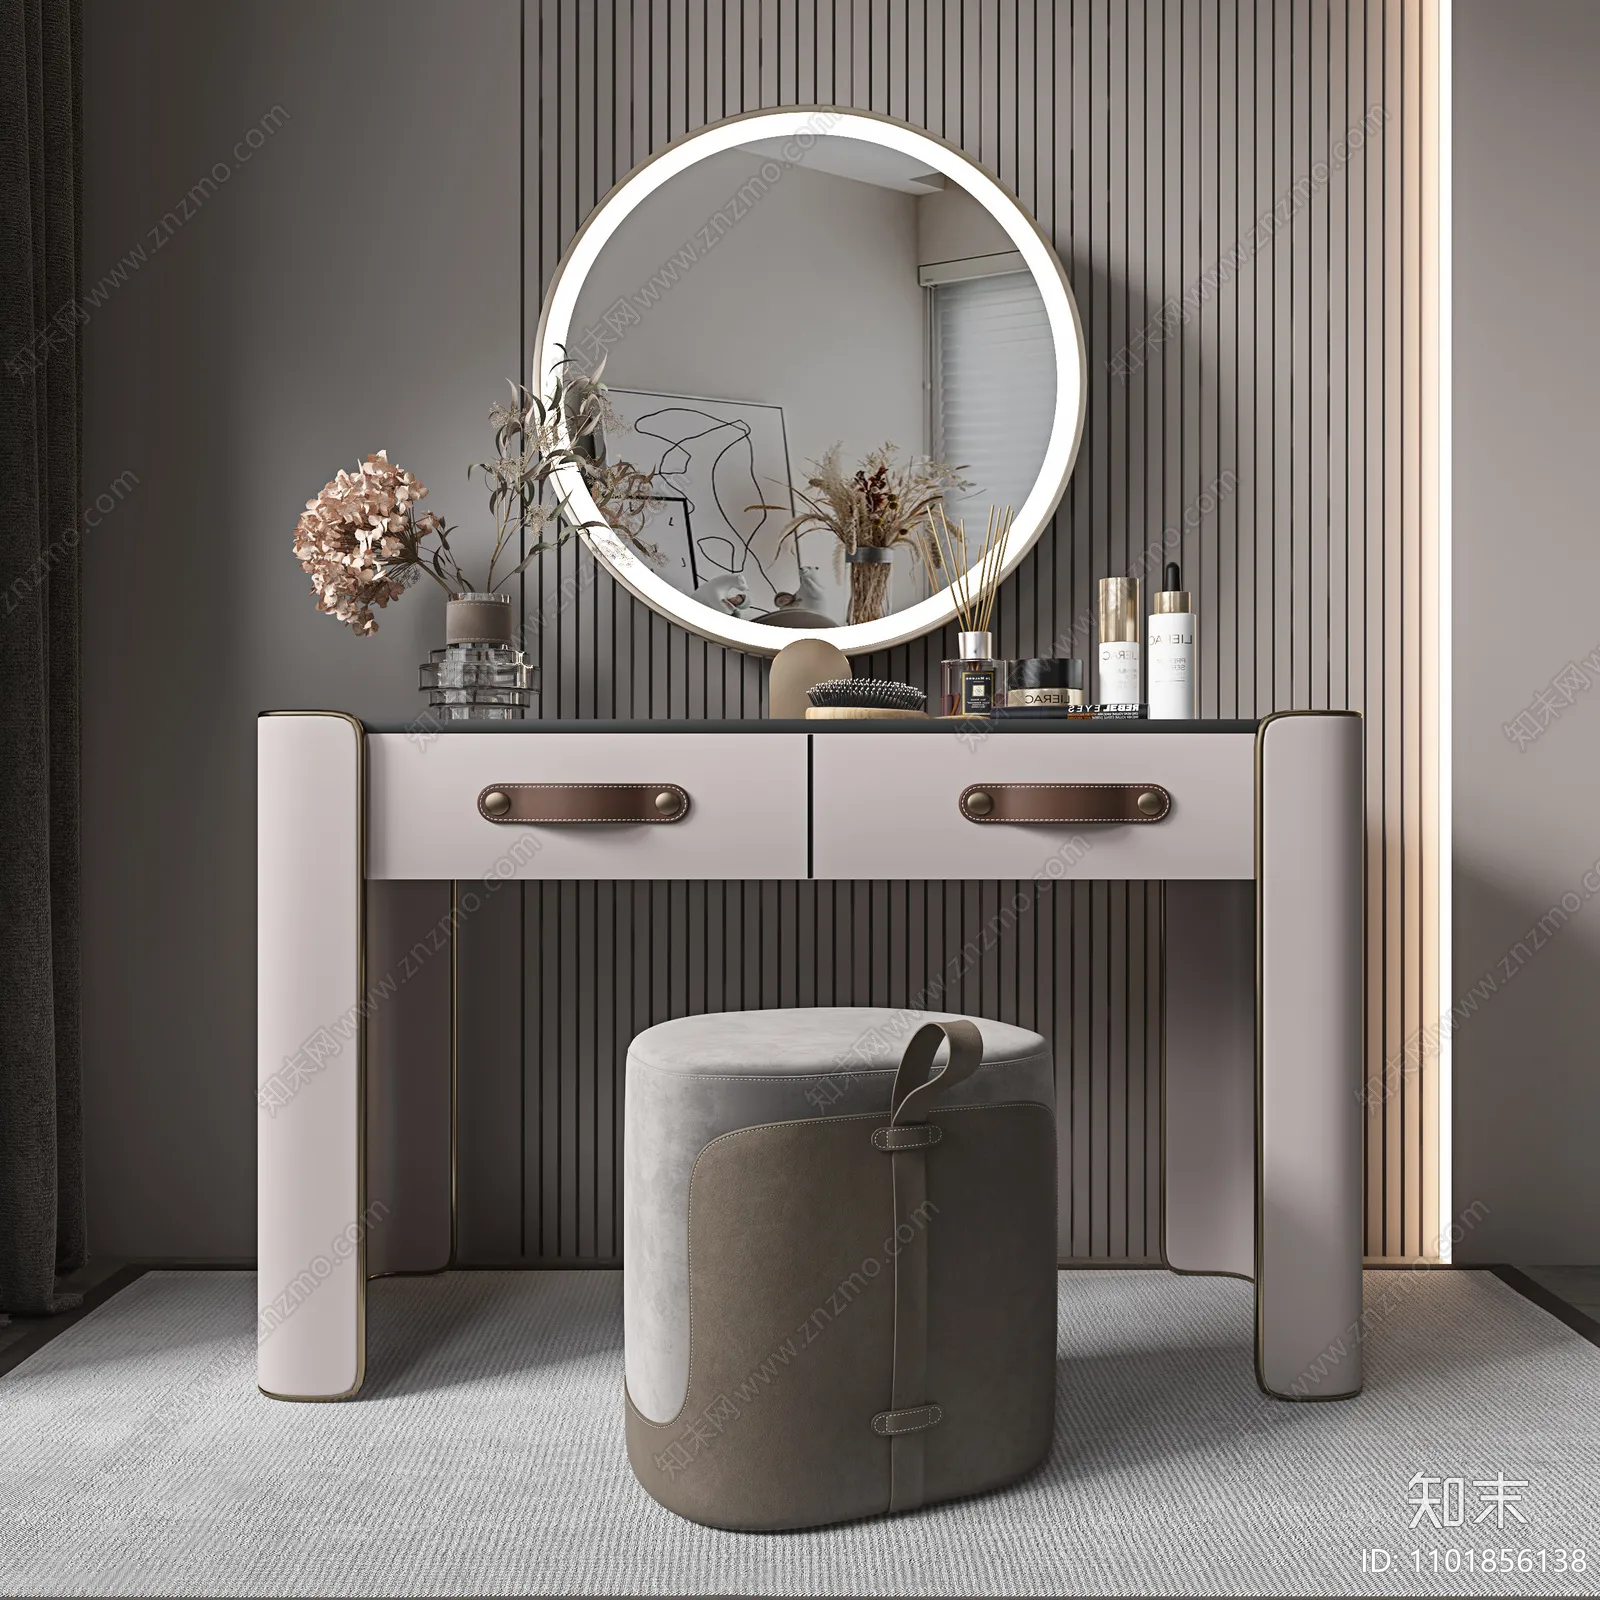 3ds Max Files – Model – 12 – Dressing Table – 12 – Dressing Table By Nguyen Ngoc Tung